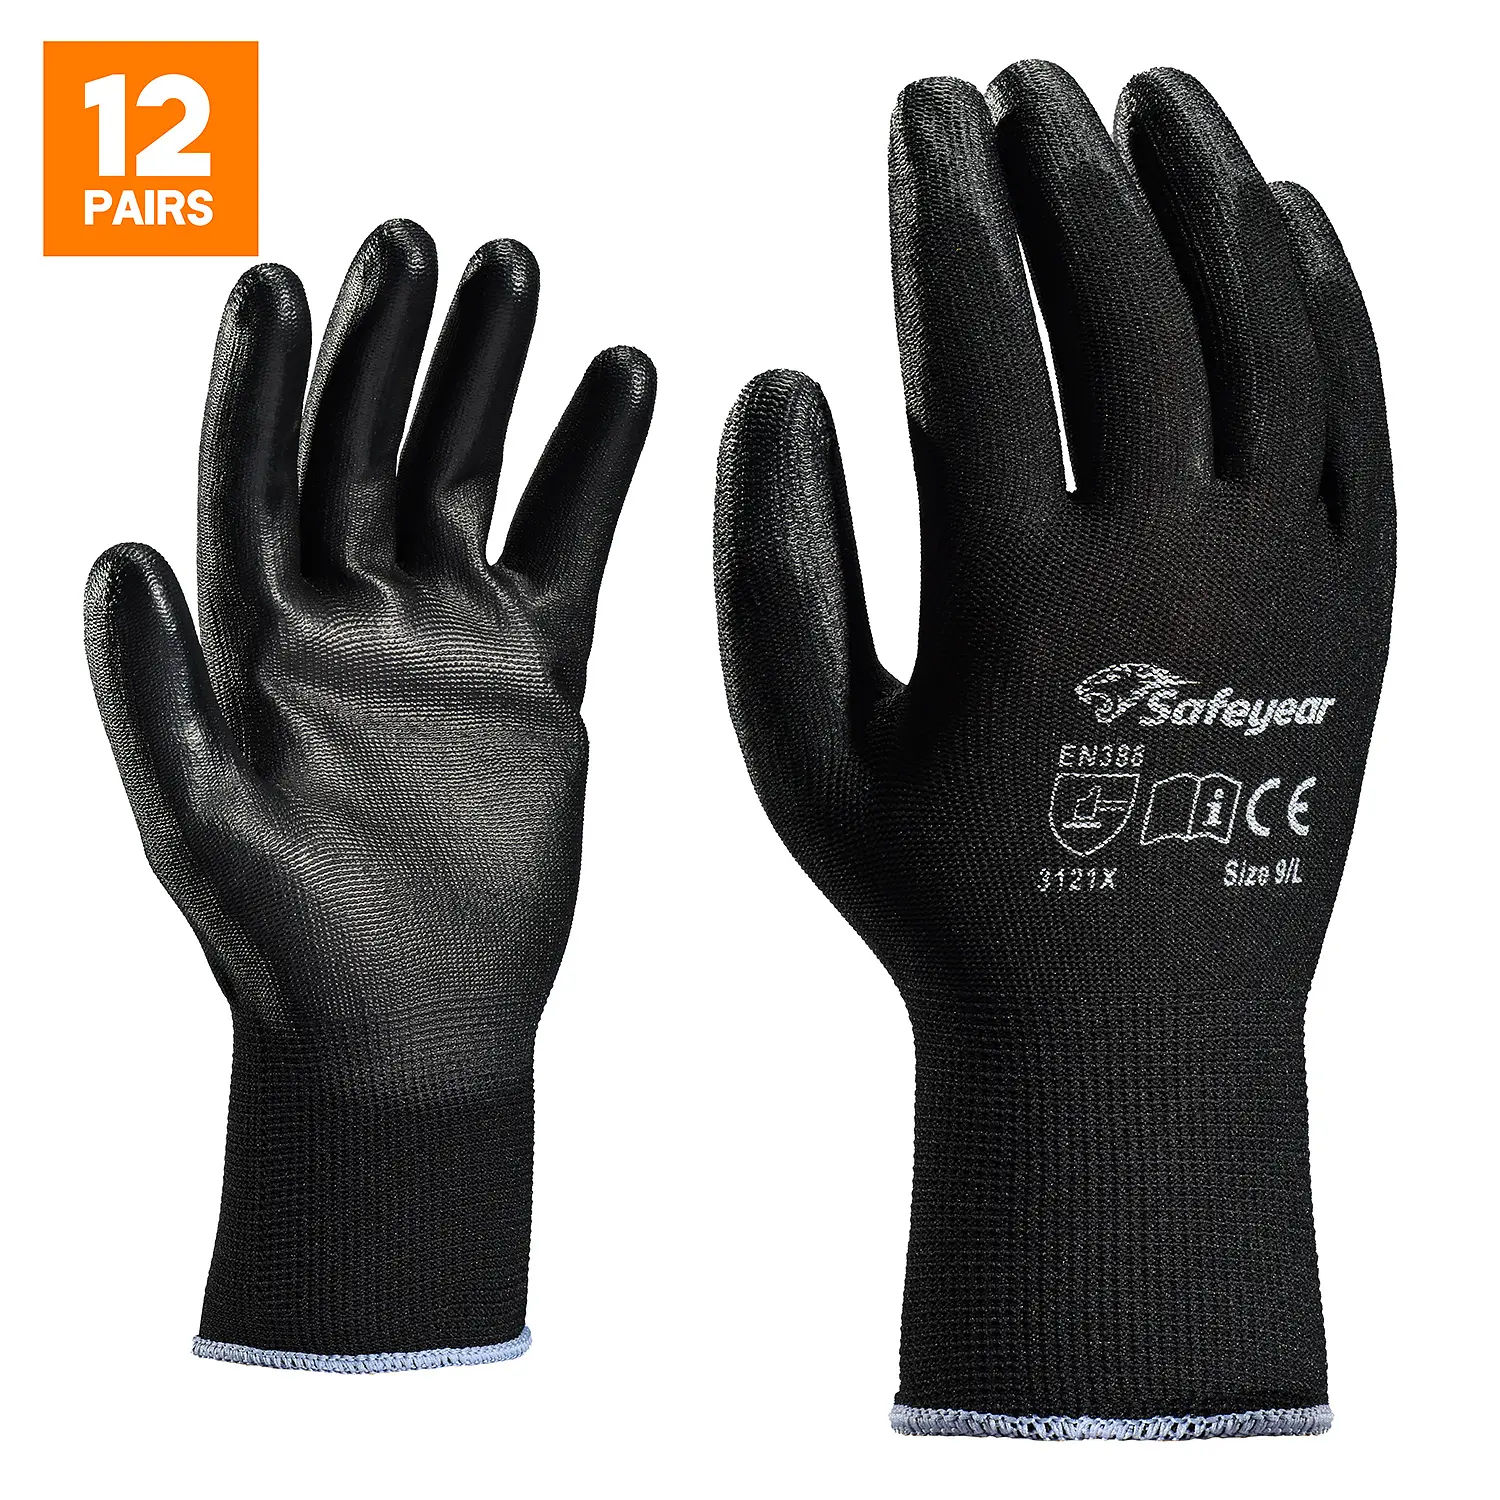 Protective PU Coated Hand Protection Safety Gloves, Heavy Duty Work Gloves for Industrial, Garden, Mechanic, Construction etc